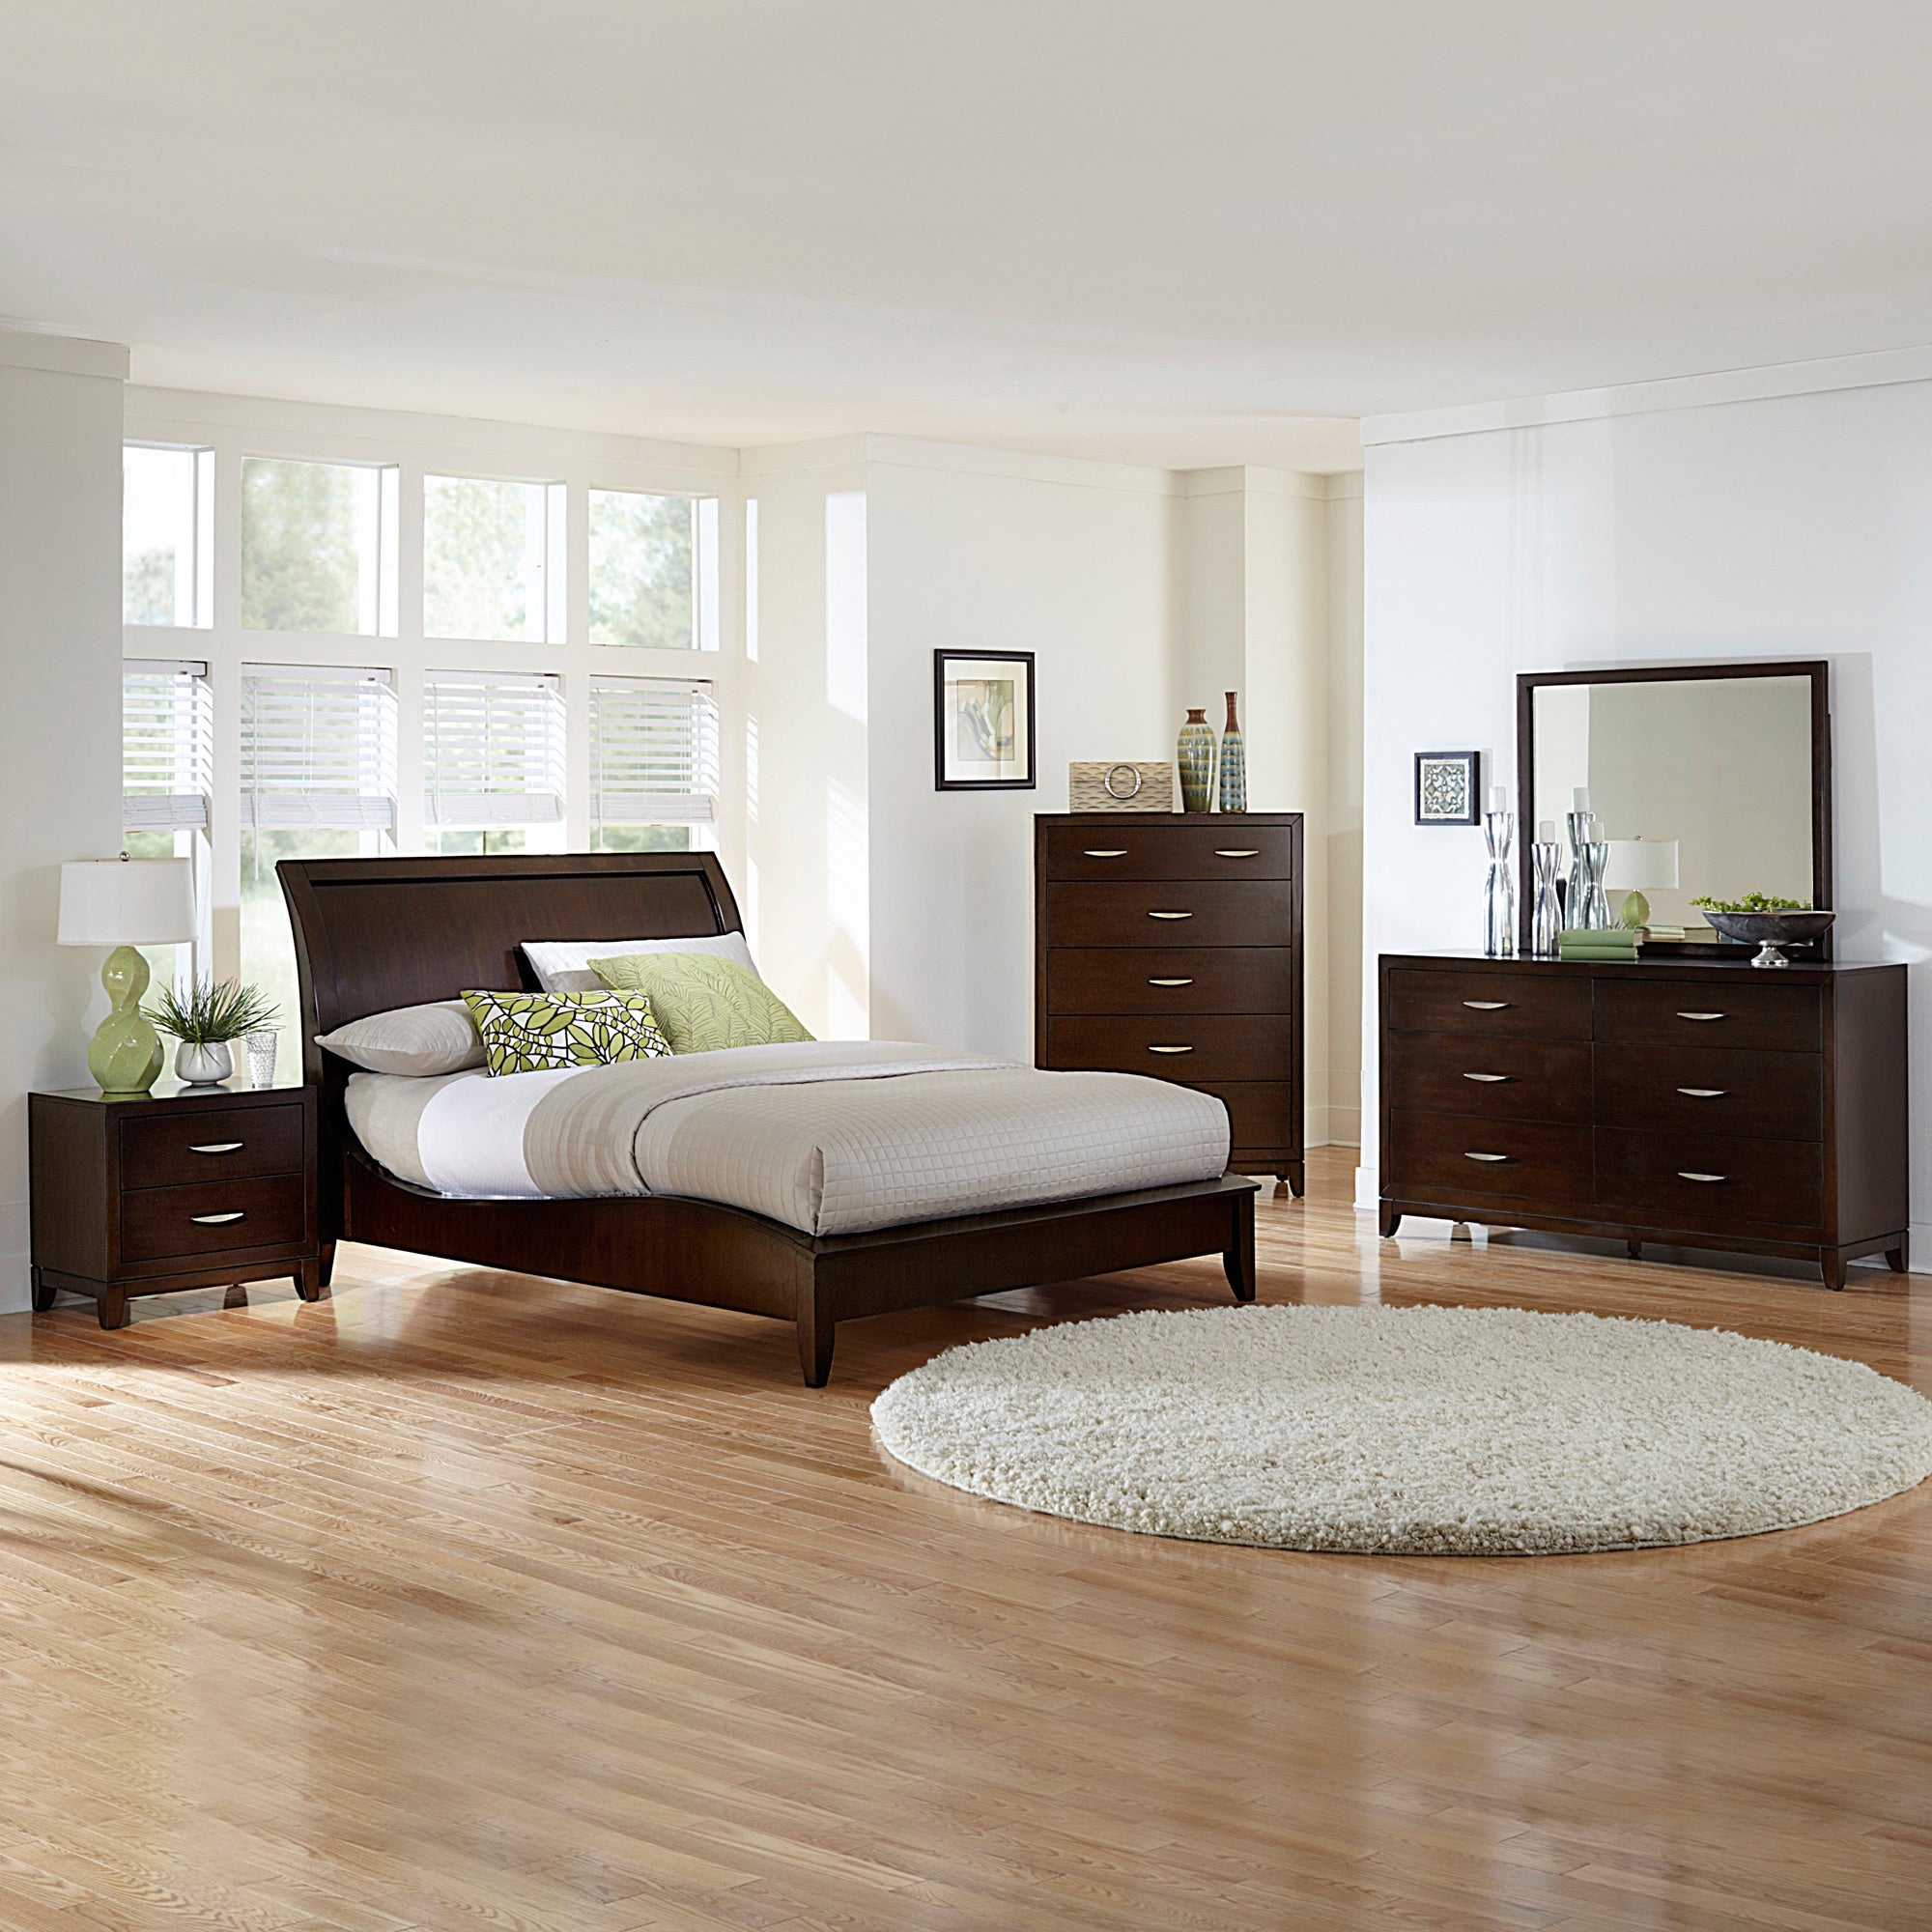 This beautiful modern bedroom set features an understated elegance that